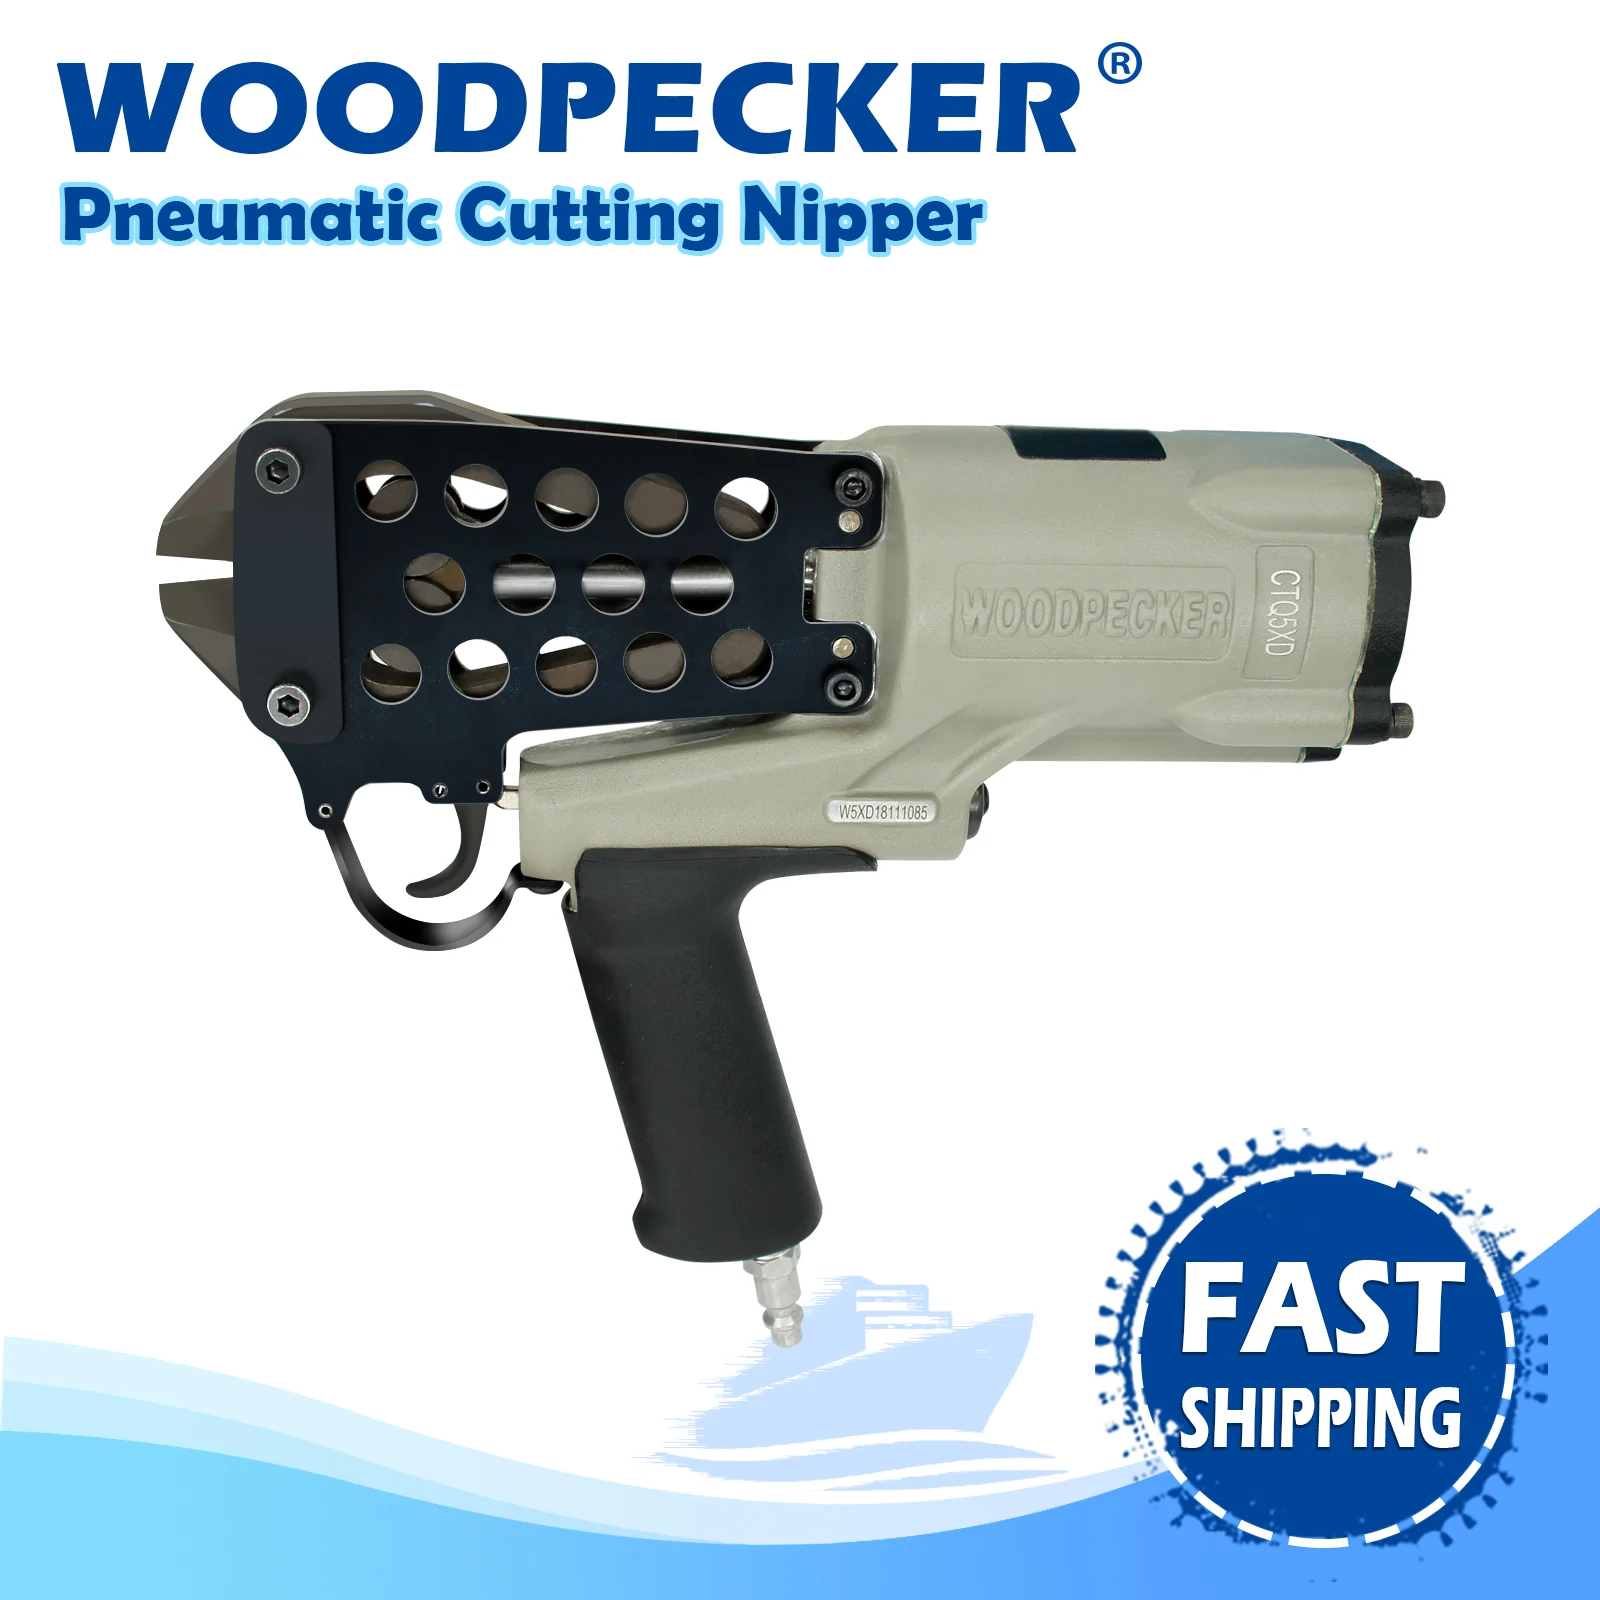 

WOODPECKER CTQ5XD Pneumatic Cutting Nipper, 3-5mm Diameter Wire Cutting, Air Power Wire Shear, Cutting Wire Tool, for Wire Cages